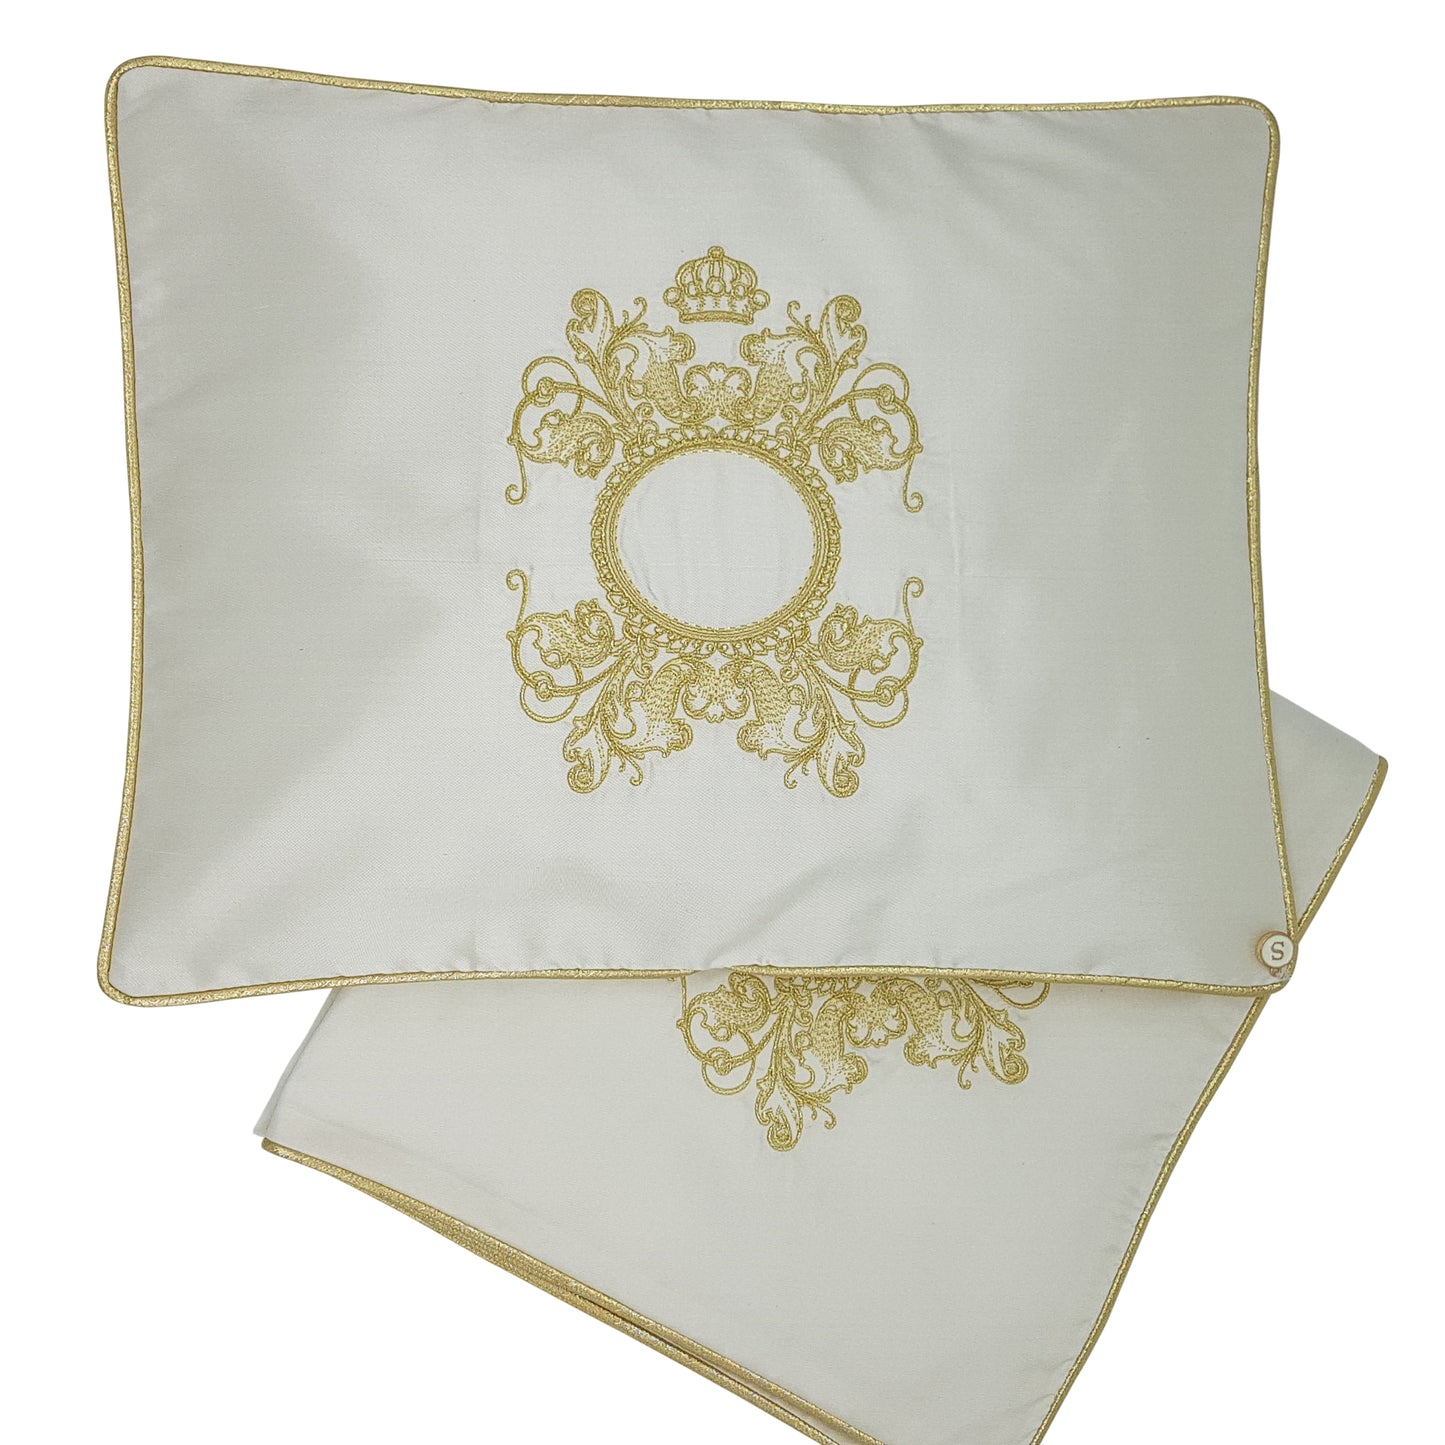 'The Crown is Hers' Embroidered Wrap & Pillowcase Set, Gold on White Silk